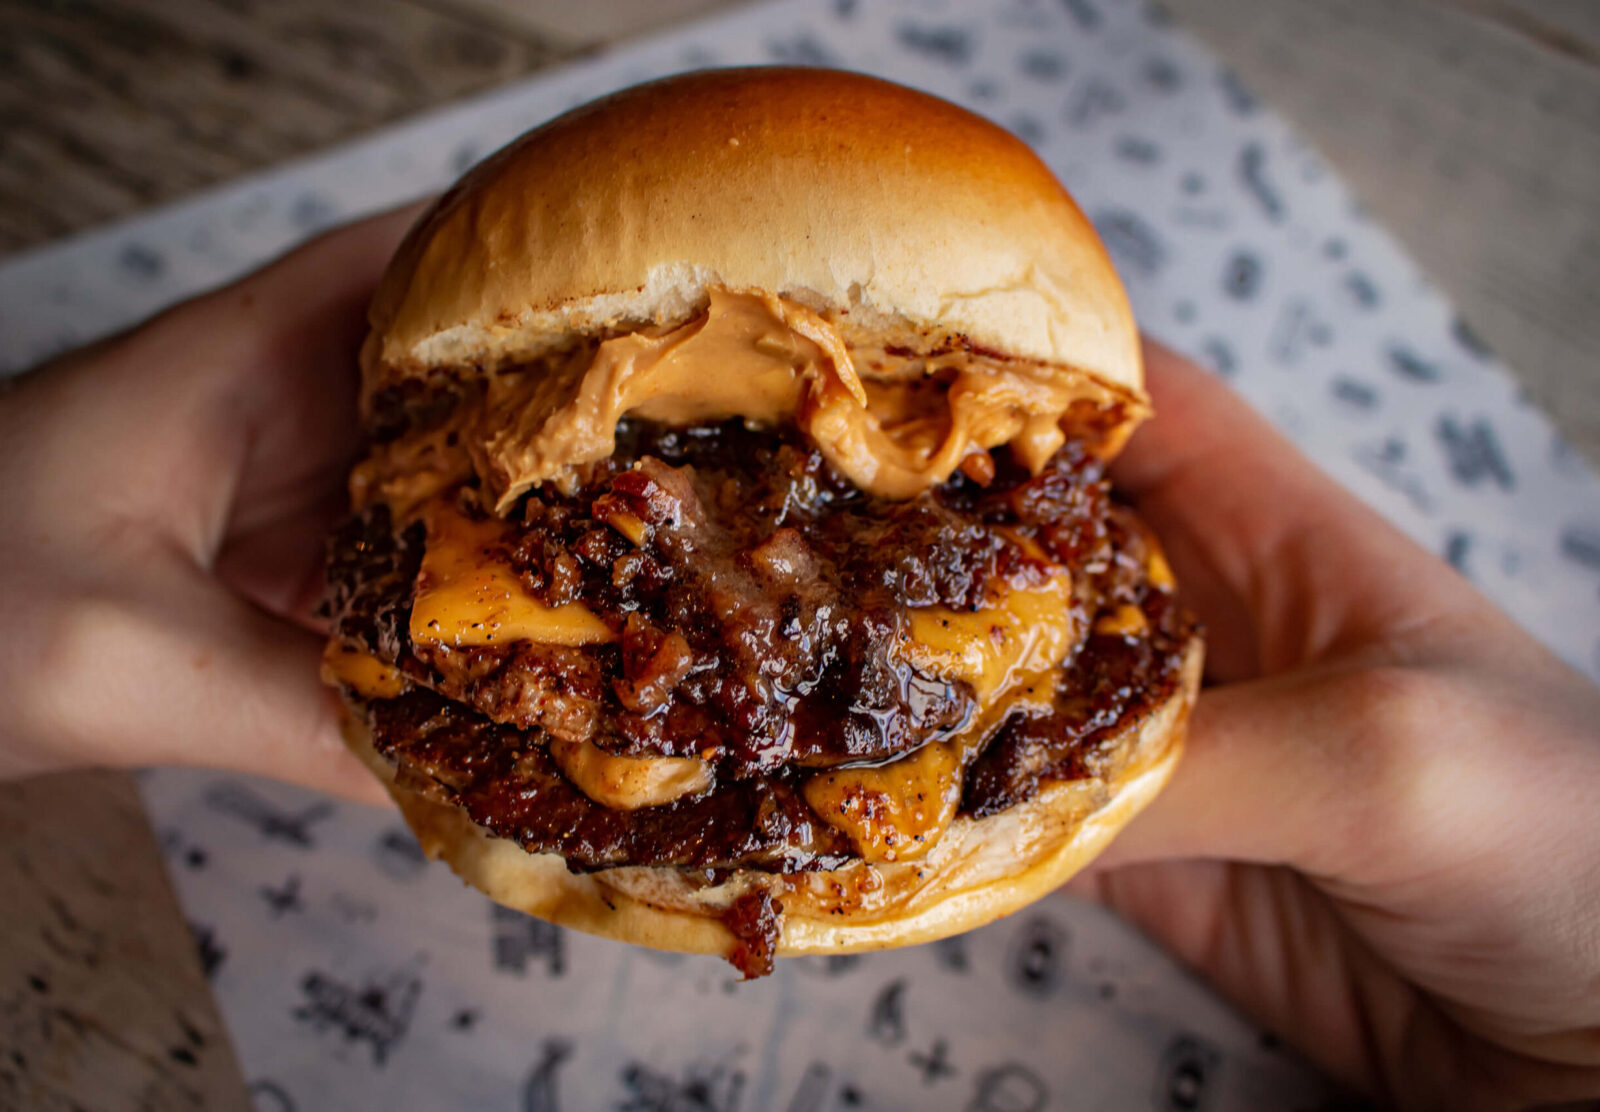 Popular northern burger chain Fat Hippo has opened a new Manchester site today, The Manc